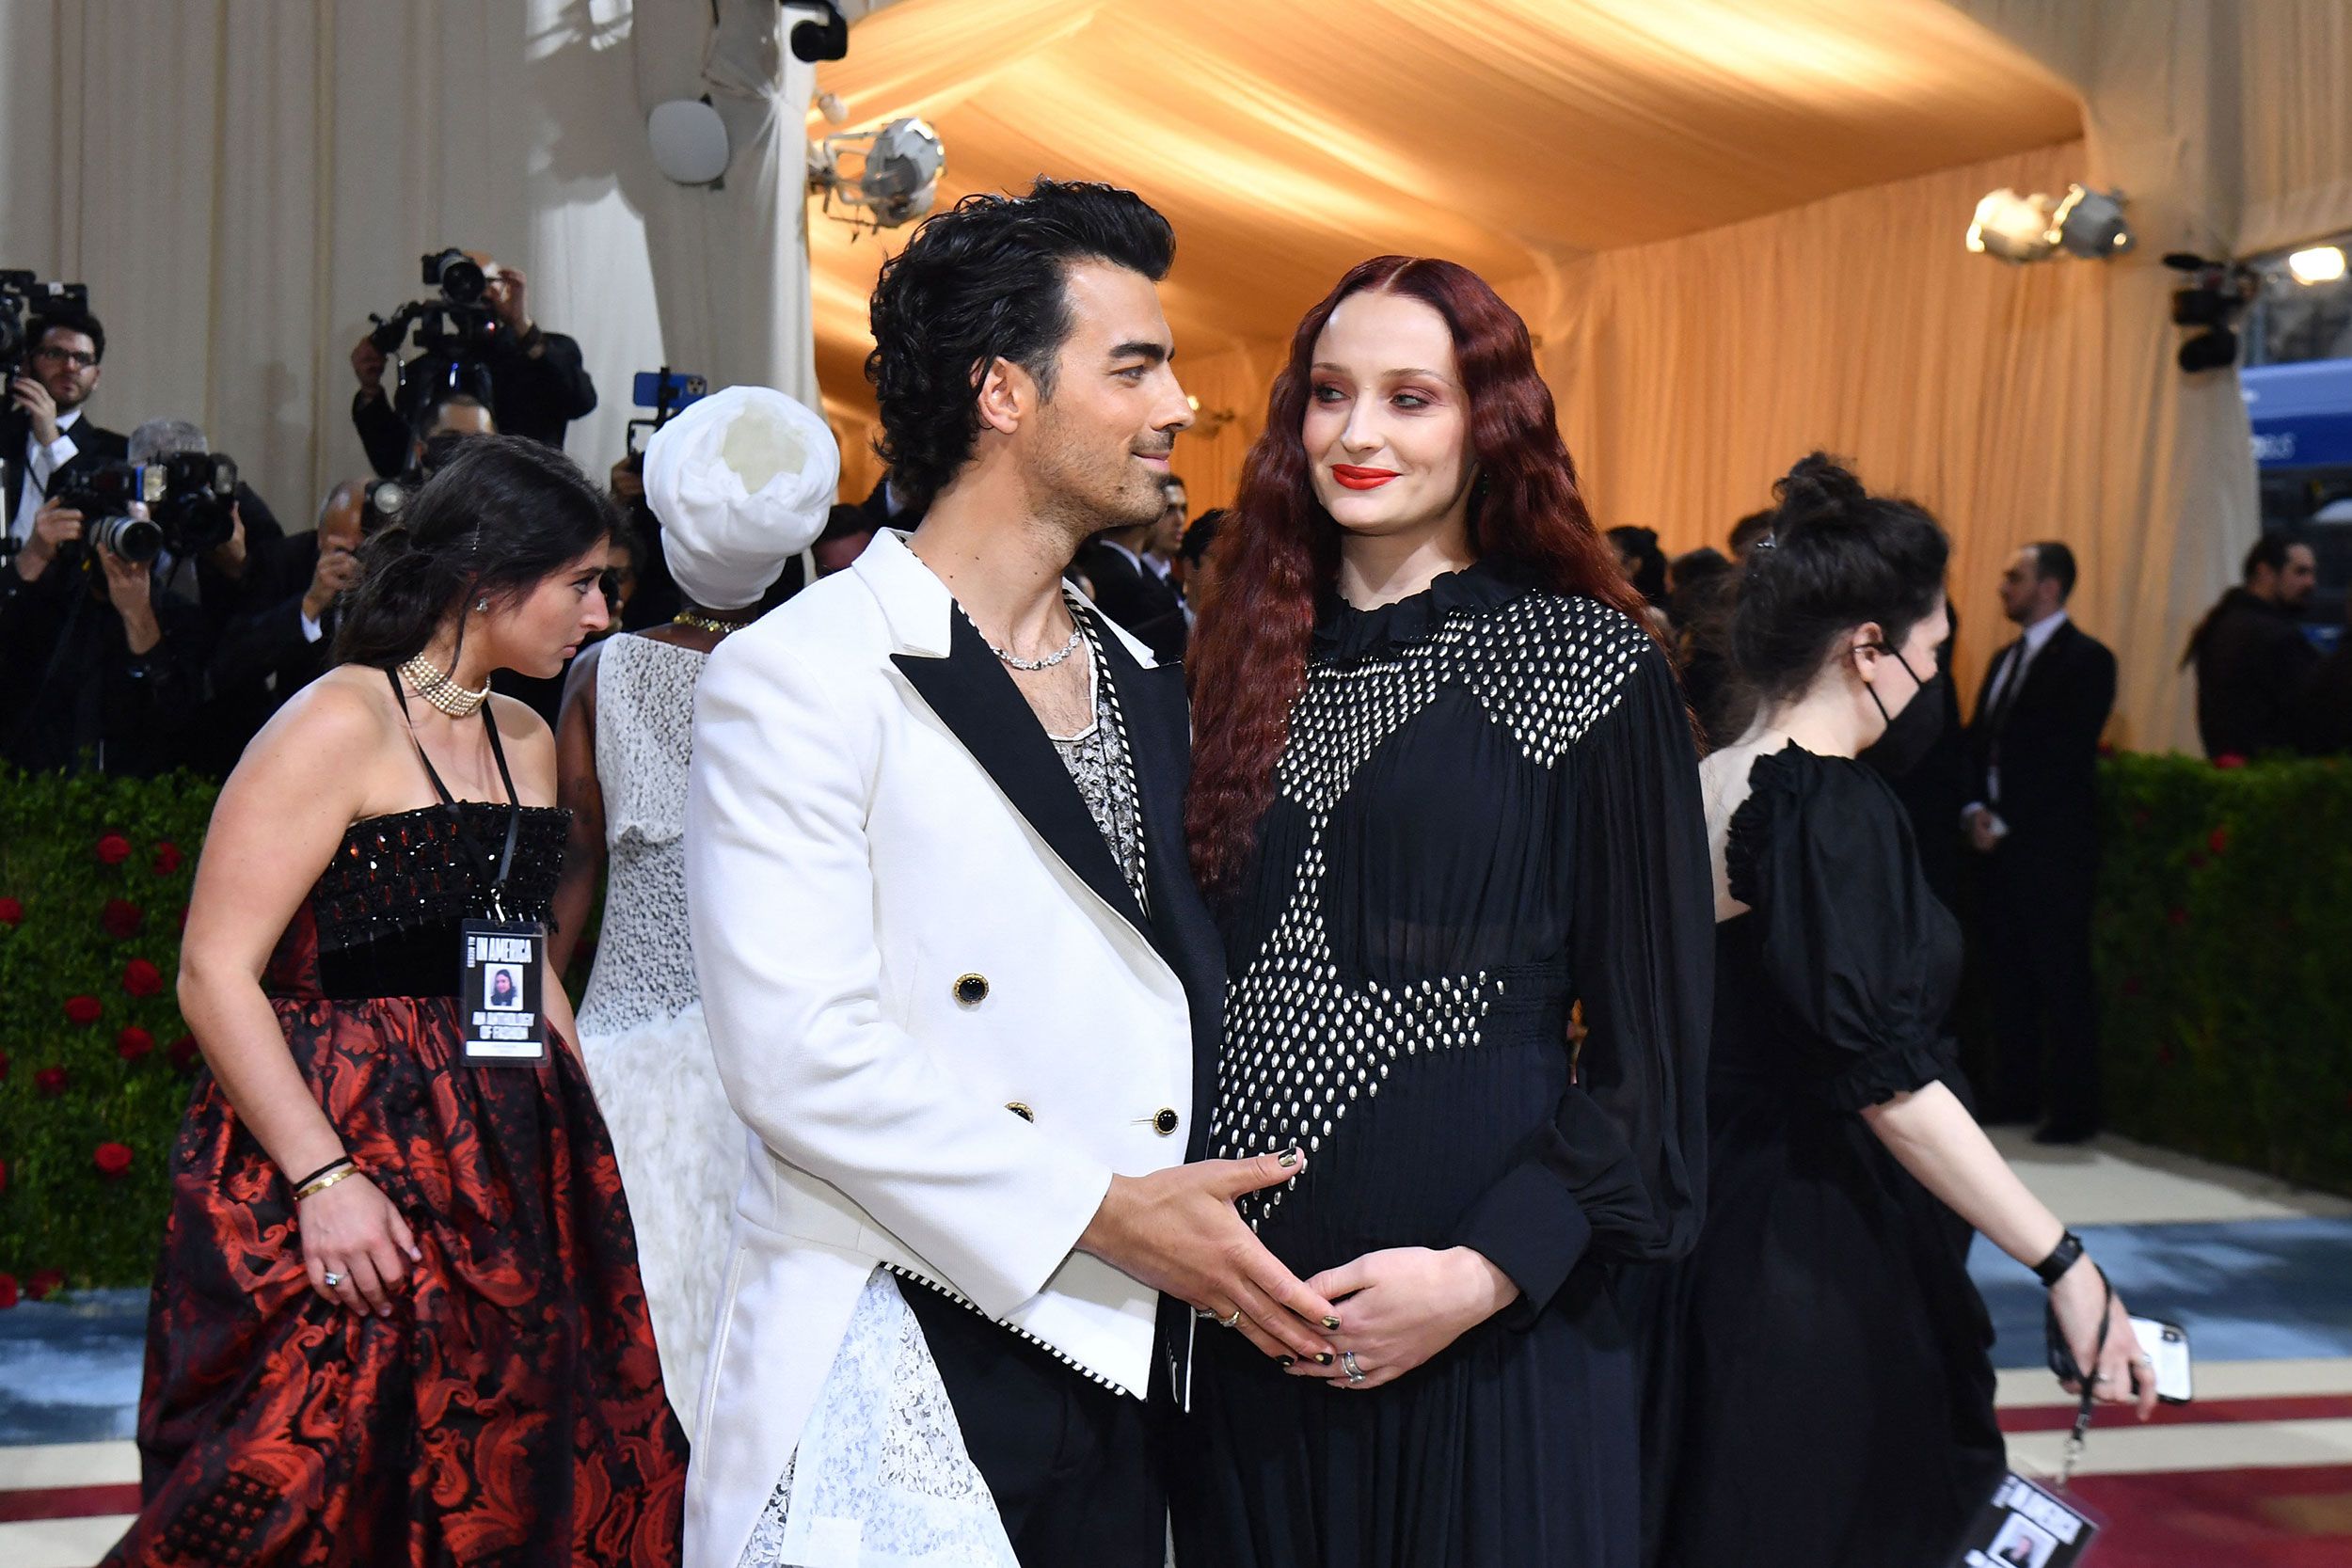 Sophie Turner filed the lawsuit against Joe Jonas requesting to secure “the  immediate return of children wrongfully removed or wrongfully…